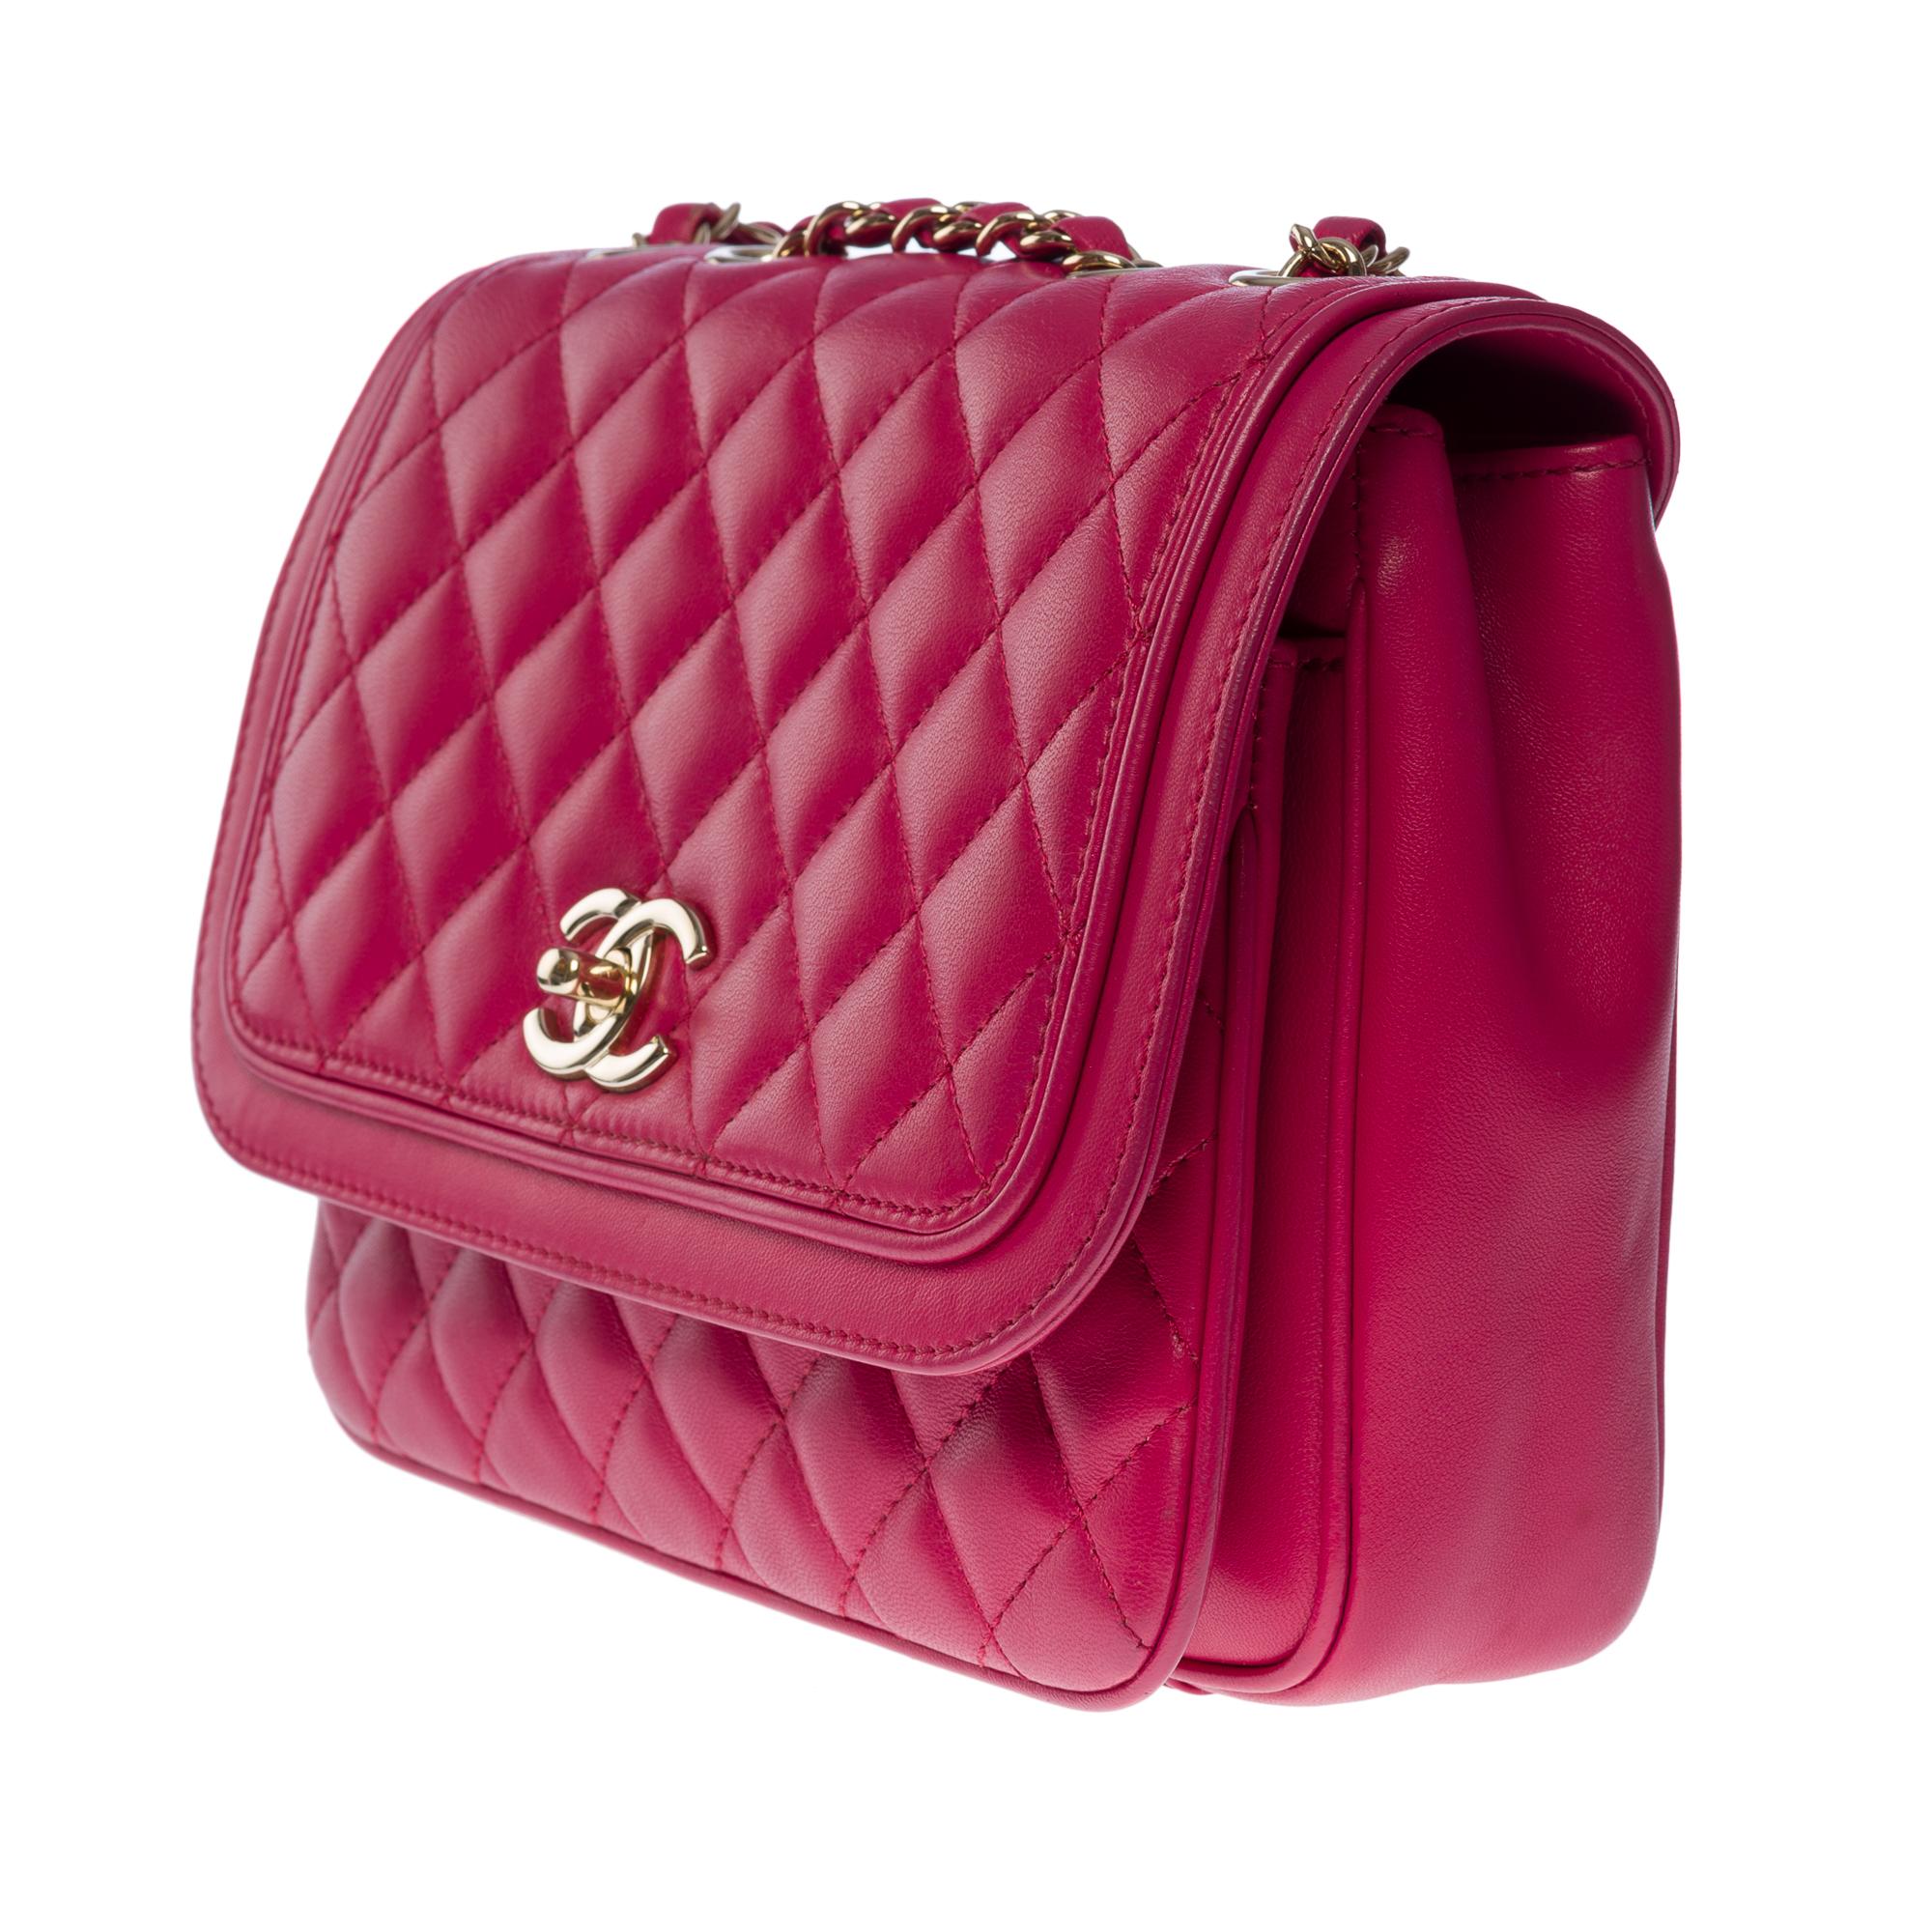 Women's Chanel Timeless/Classic double flap shoulder bag in pink quilted lambskin, CHW